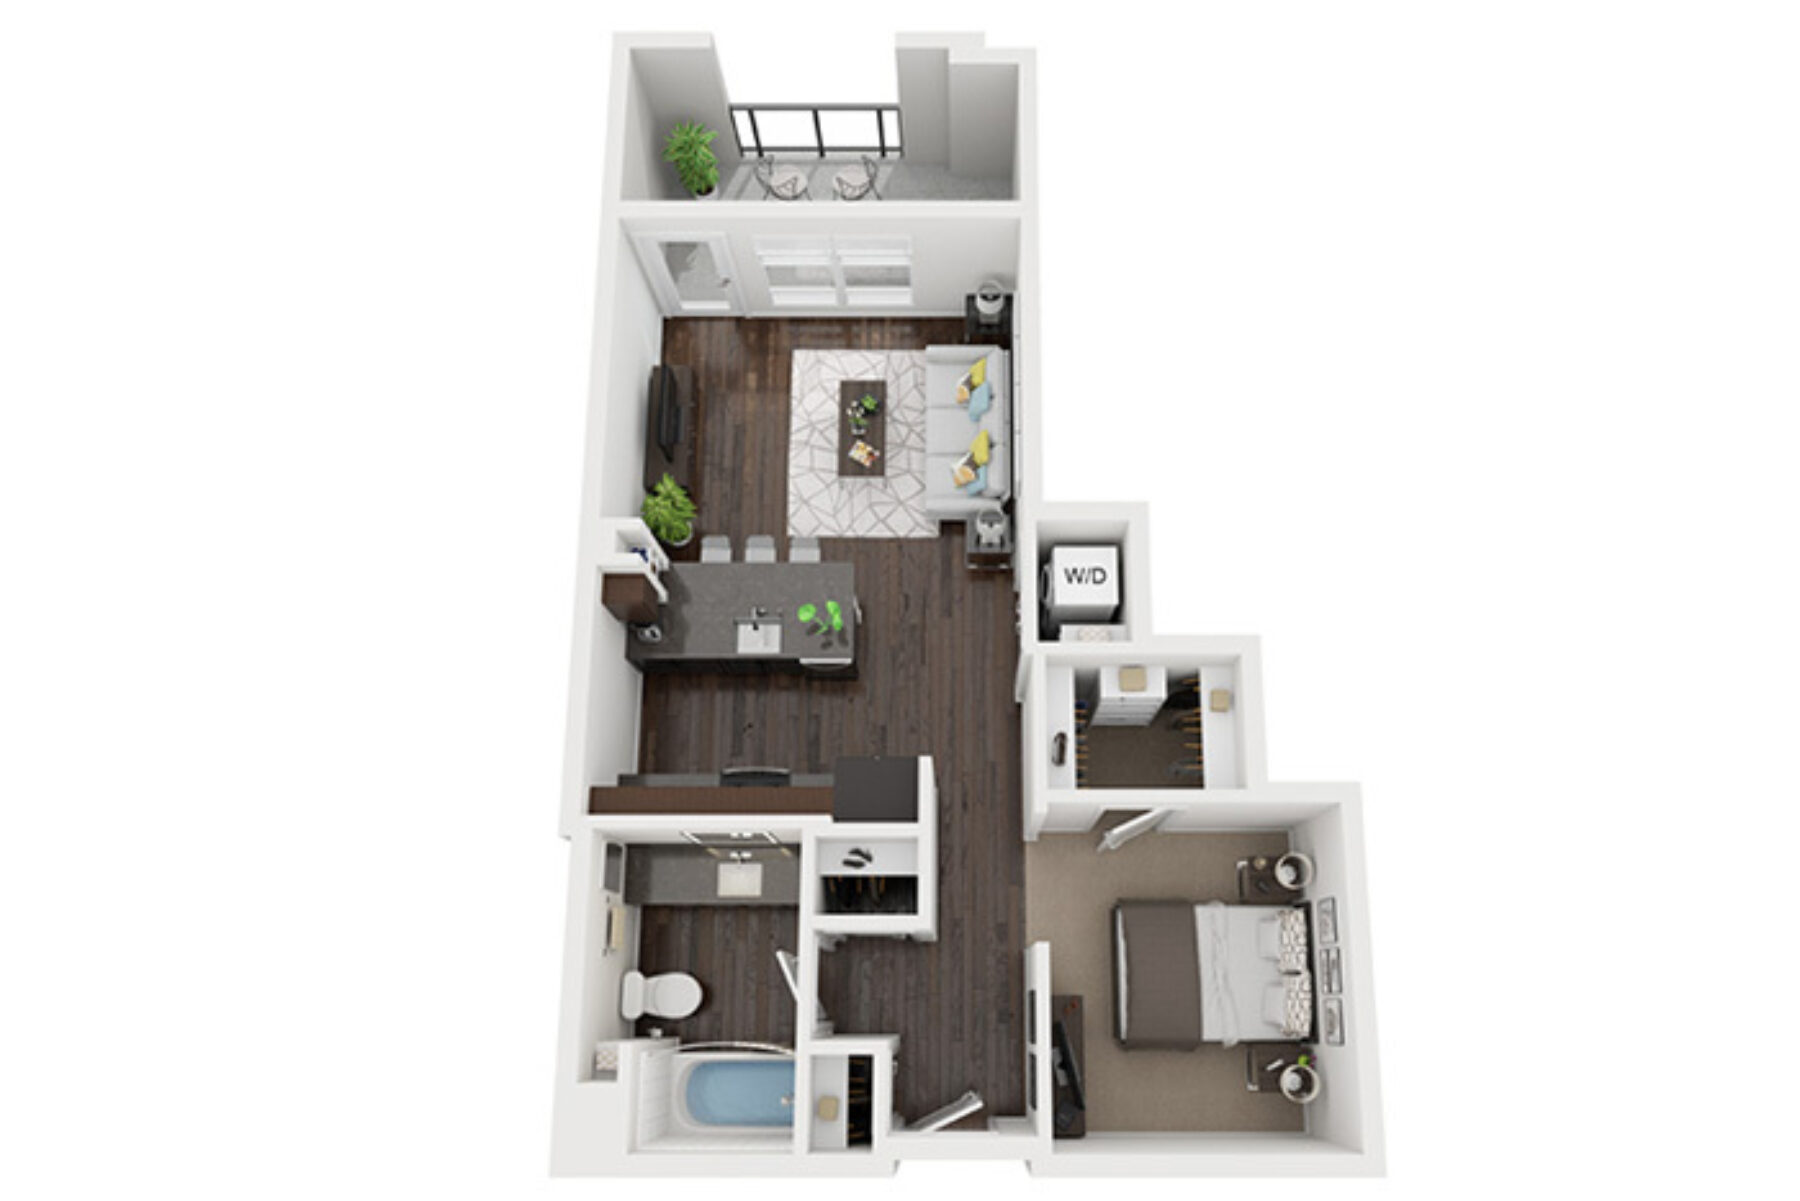 Plan Image: The Suite